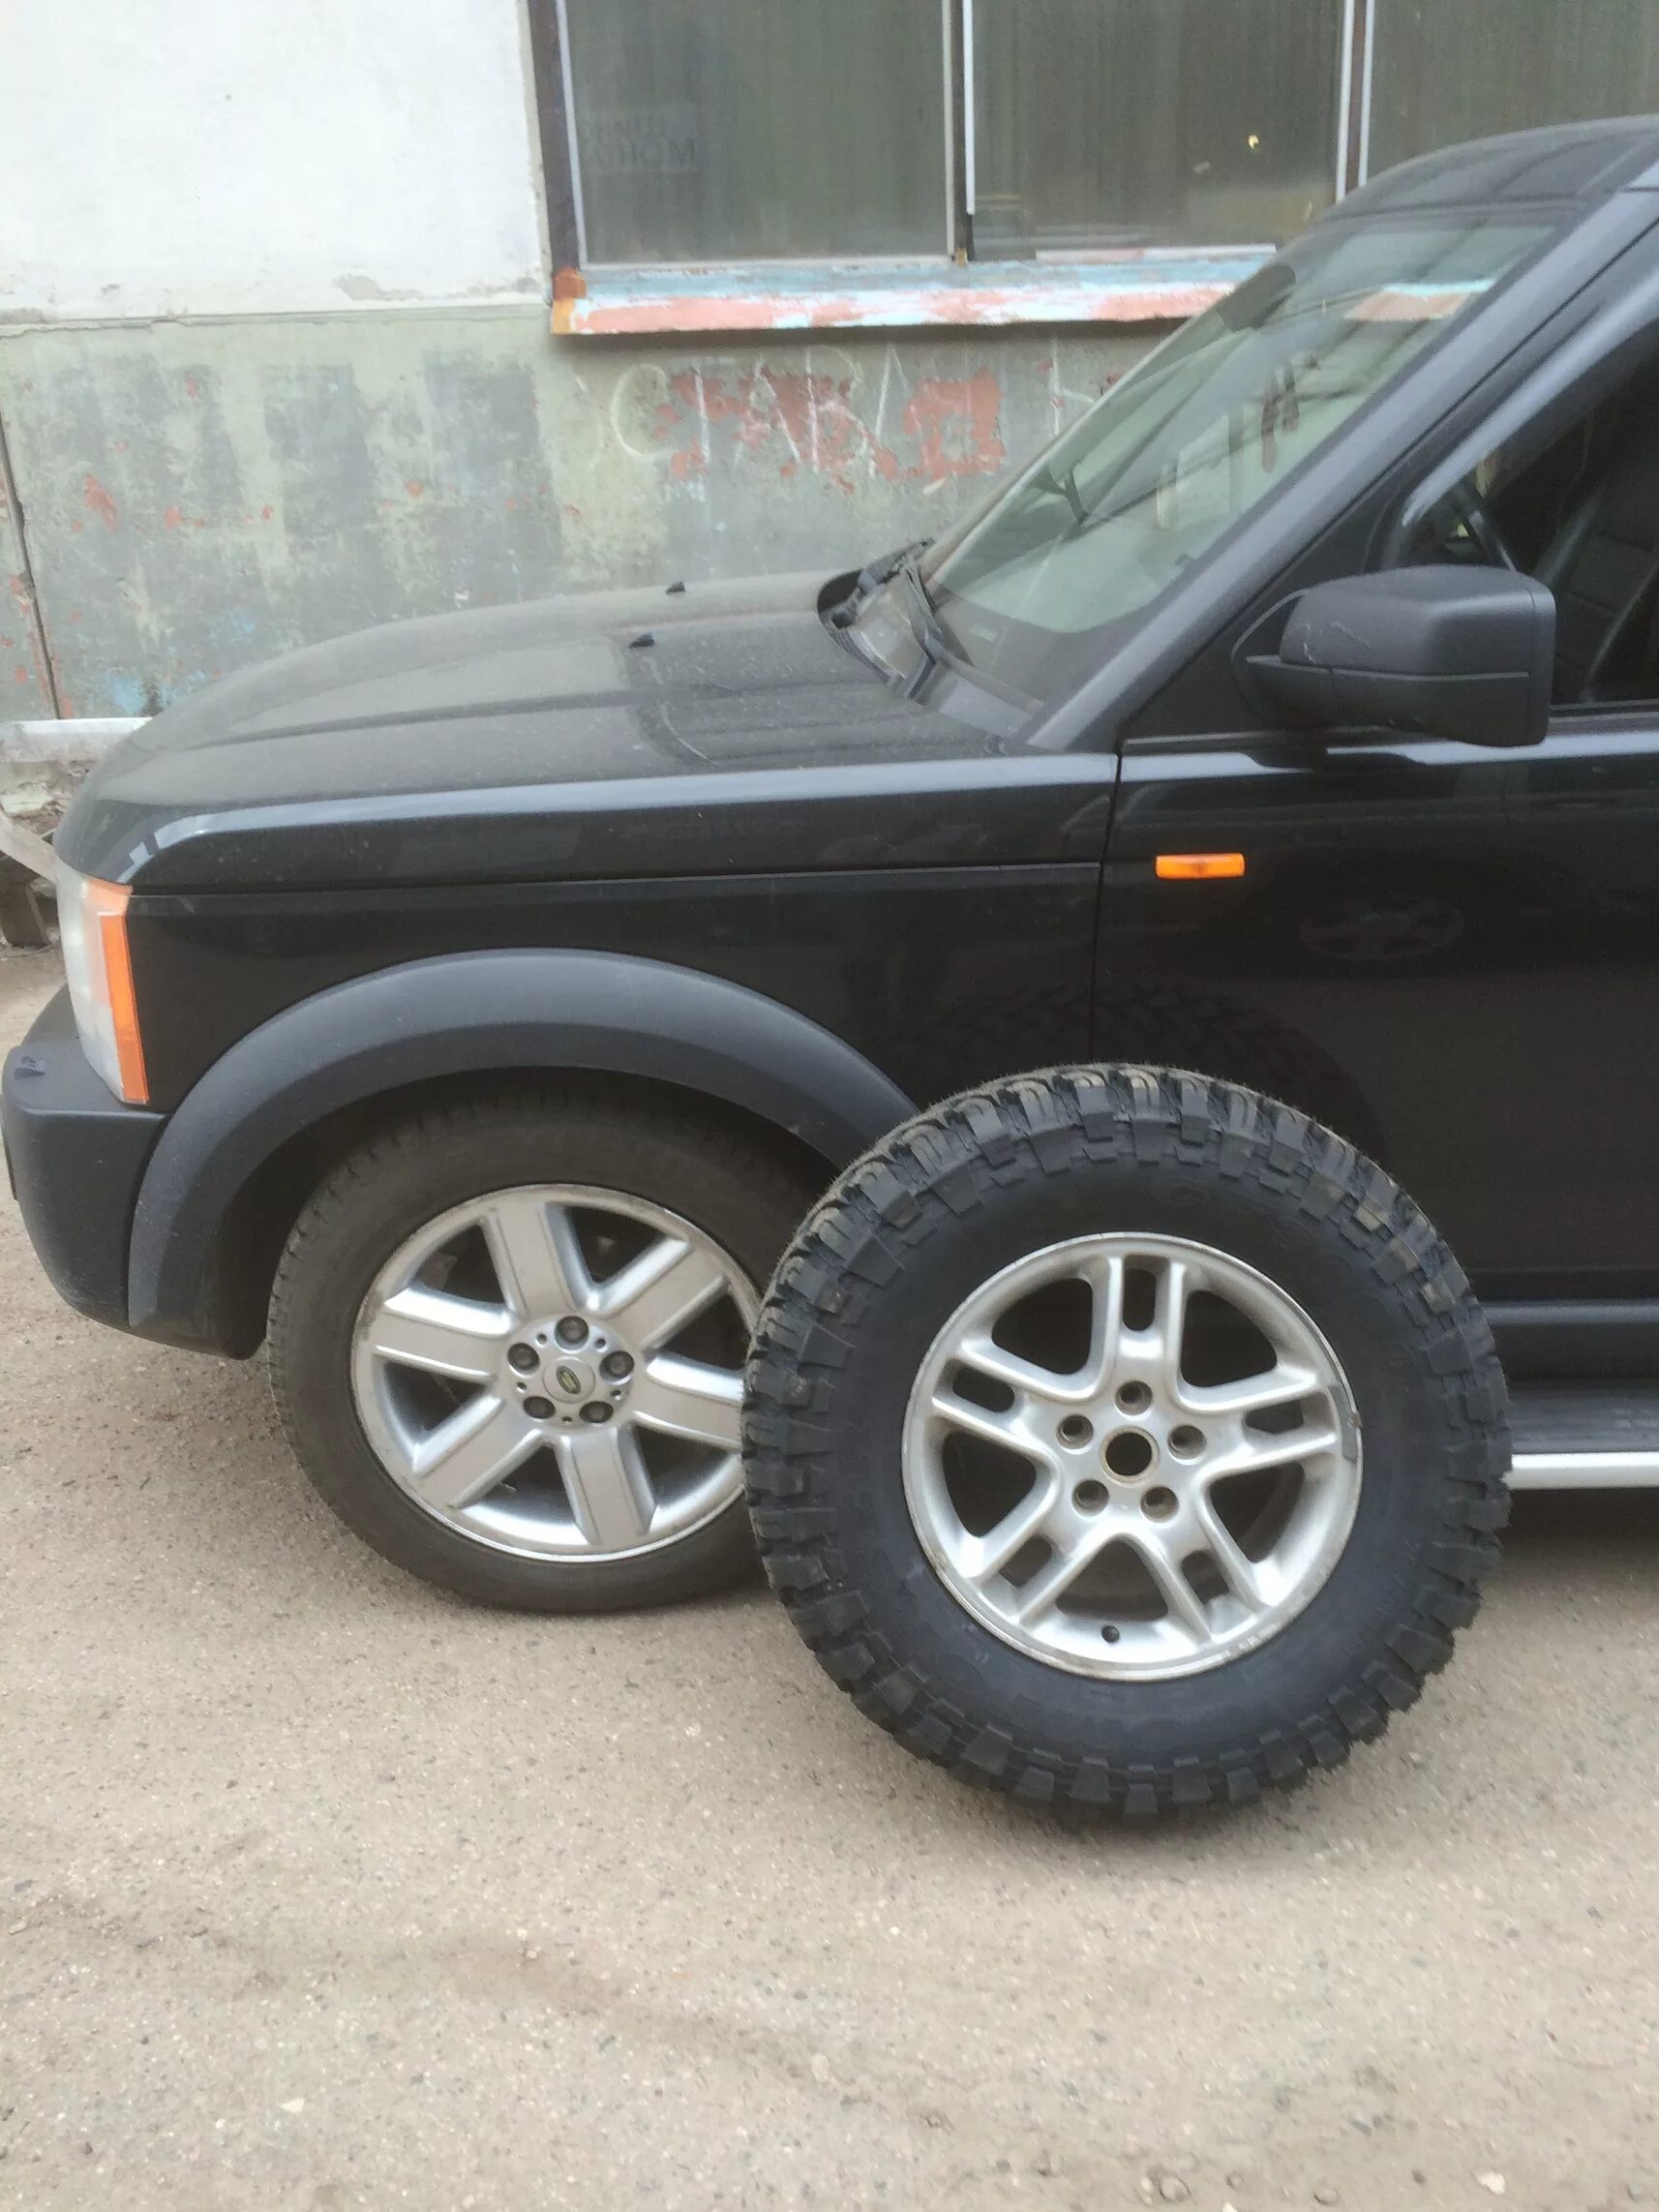 Discovery 3 285/65 r18. Дискавери 3 на грязевой резине r20. 285/70 R17 Дискавери 3. Land Rover Discovery 3 колеса r17. Шины дискавери 3